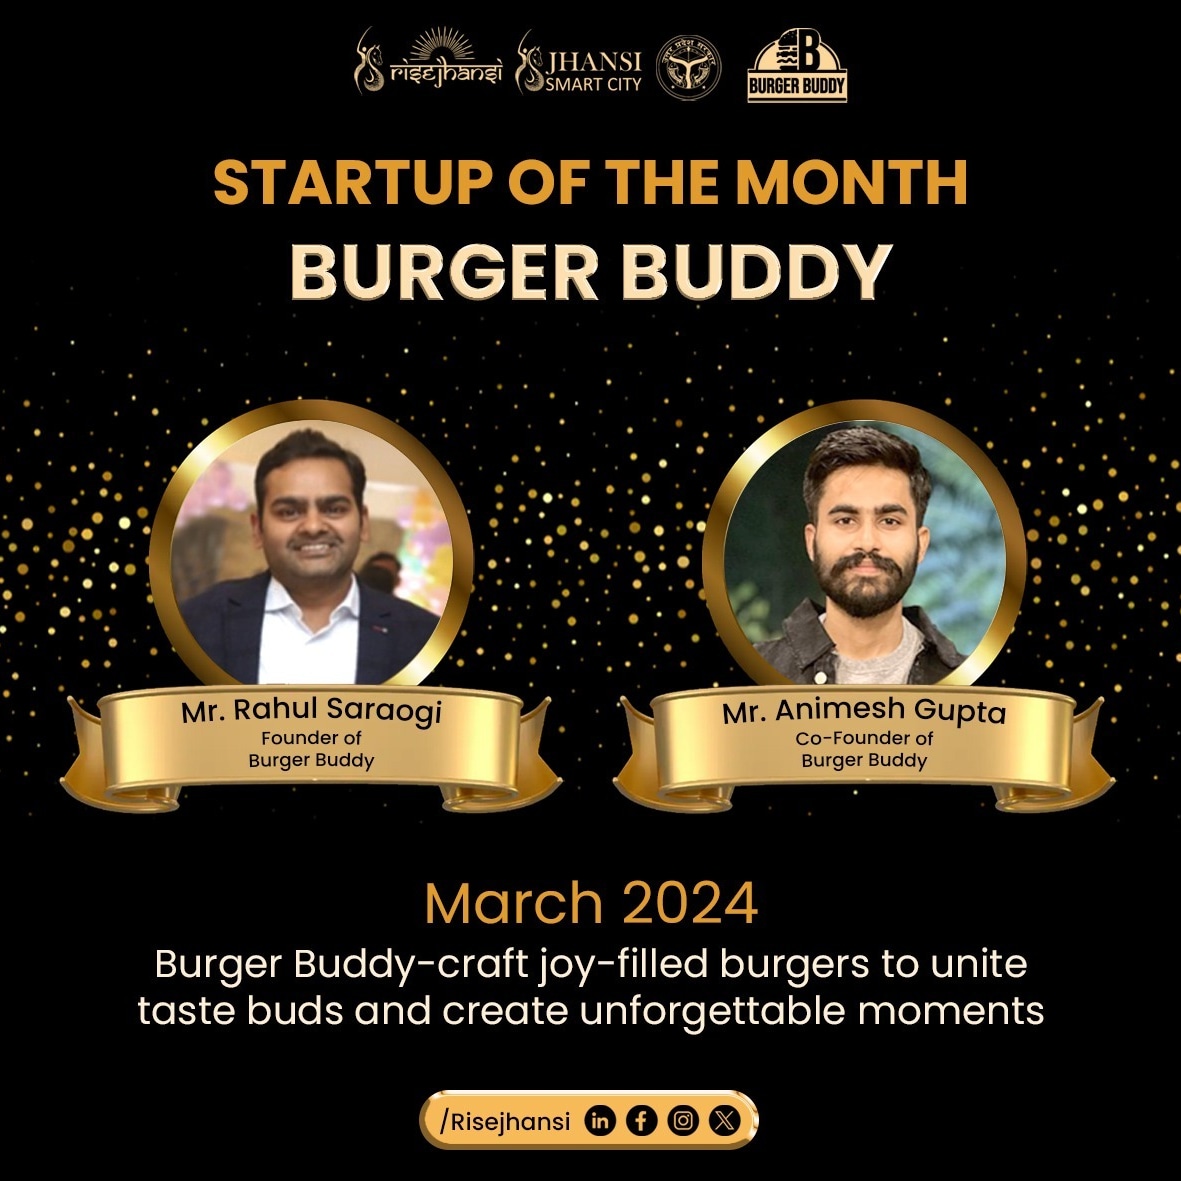 🎉 Congrats BurgerBuddy, March 2024's Startup of the Month at RISE Jhansi Incubation Center! 🌟 Revolutionizing fast food with fresh, local ingredients and sustainability at its core. Way to go! 🍔 #StartupOfTheMonth #BurgerBuddy #Sustainability